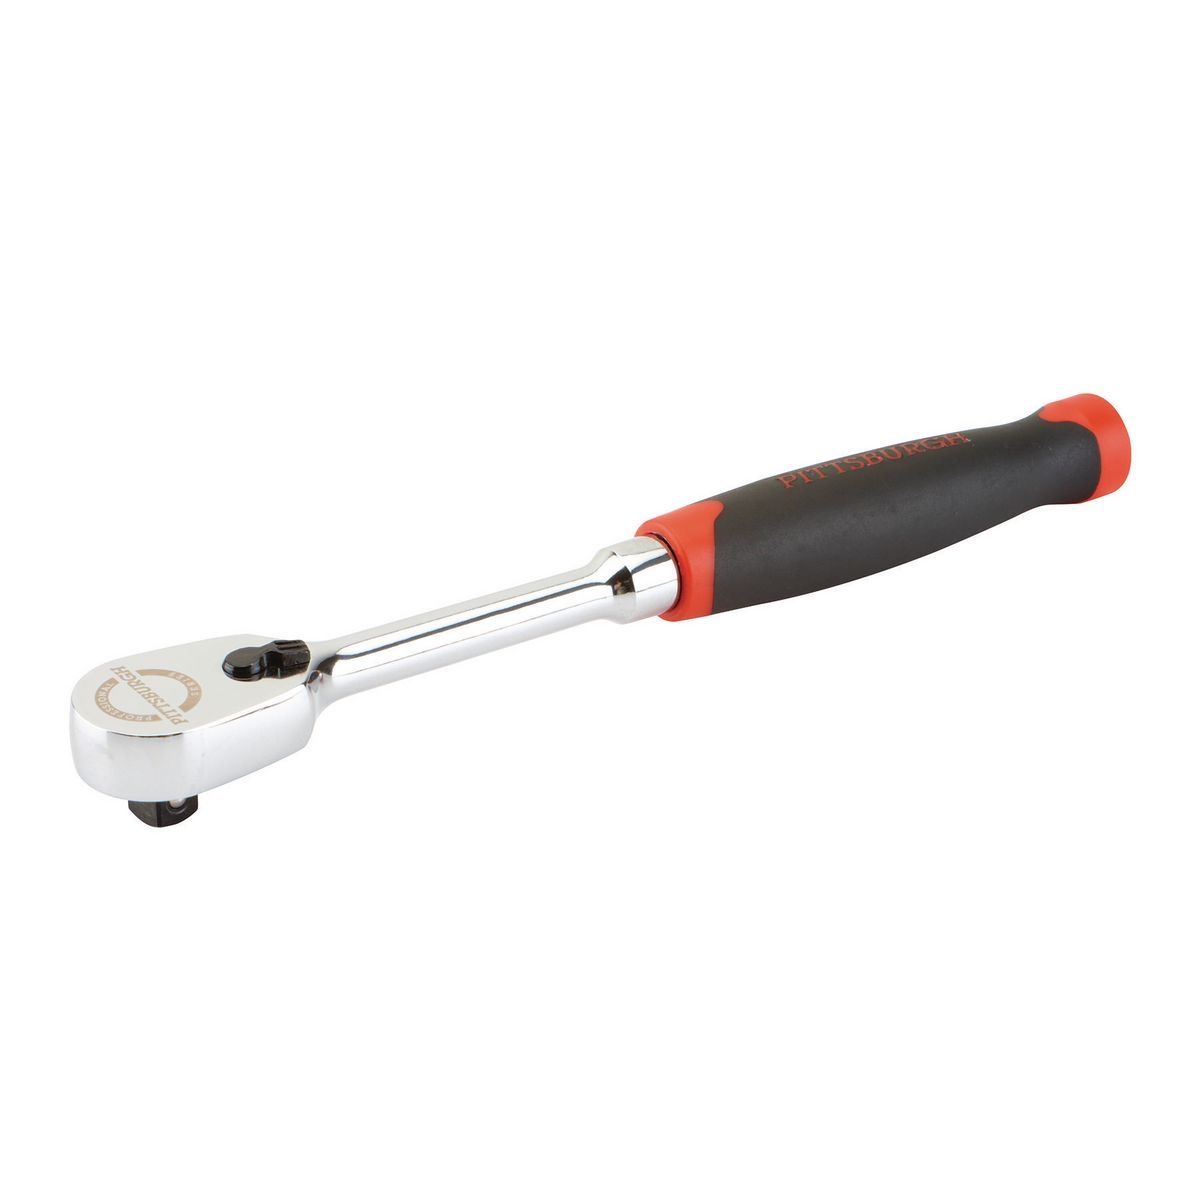 PITTSBURGH PRO 3/8 in. Drive Low-Profile Ratchet